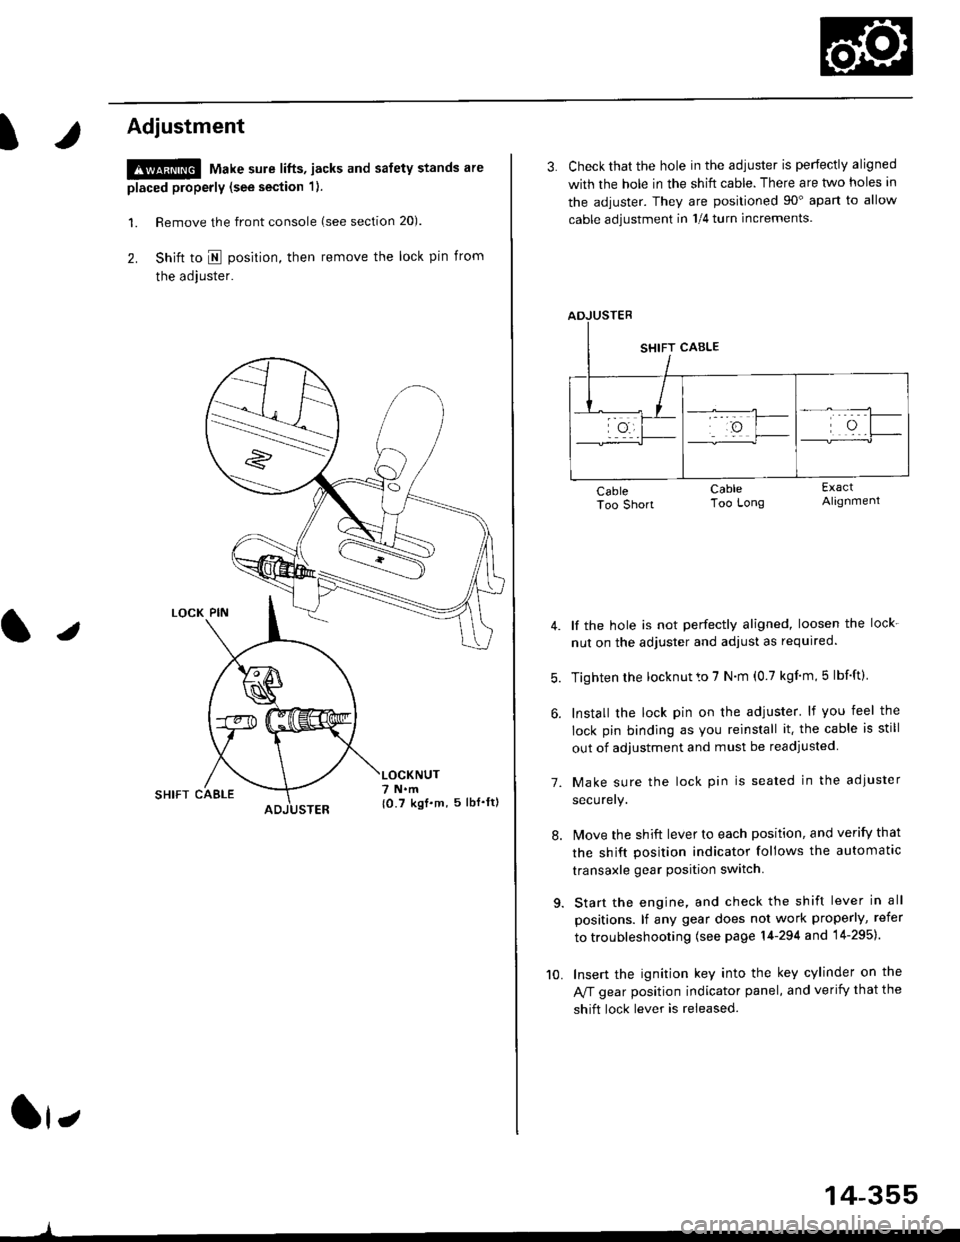 HONDA CIVIC 1997 6.G Workshop Manual t
Adjustment
!@ Make sure lifts, jacks and safety stands are
placed properly (see section 1).
l. Remove the front console (see section 20).
2. Shift to I posirion, then remove the lock pin from
the ad